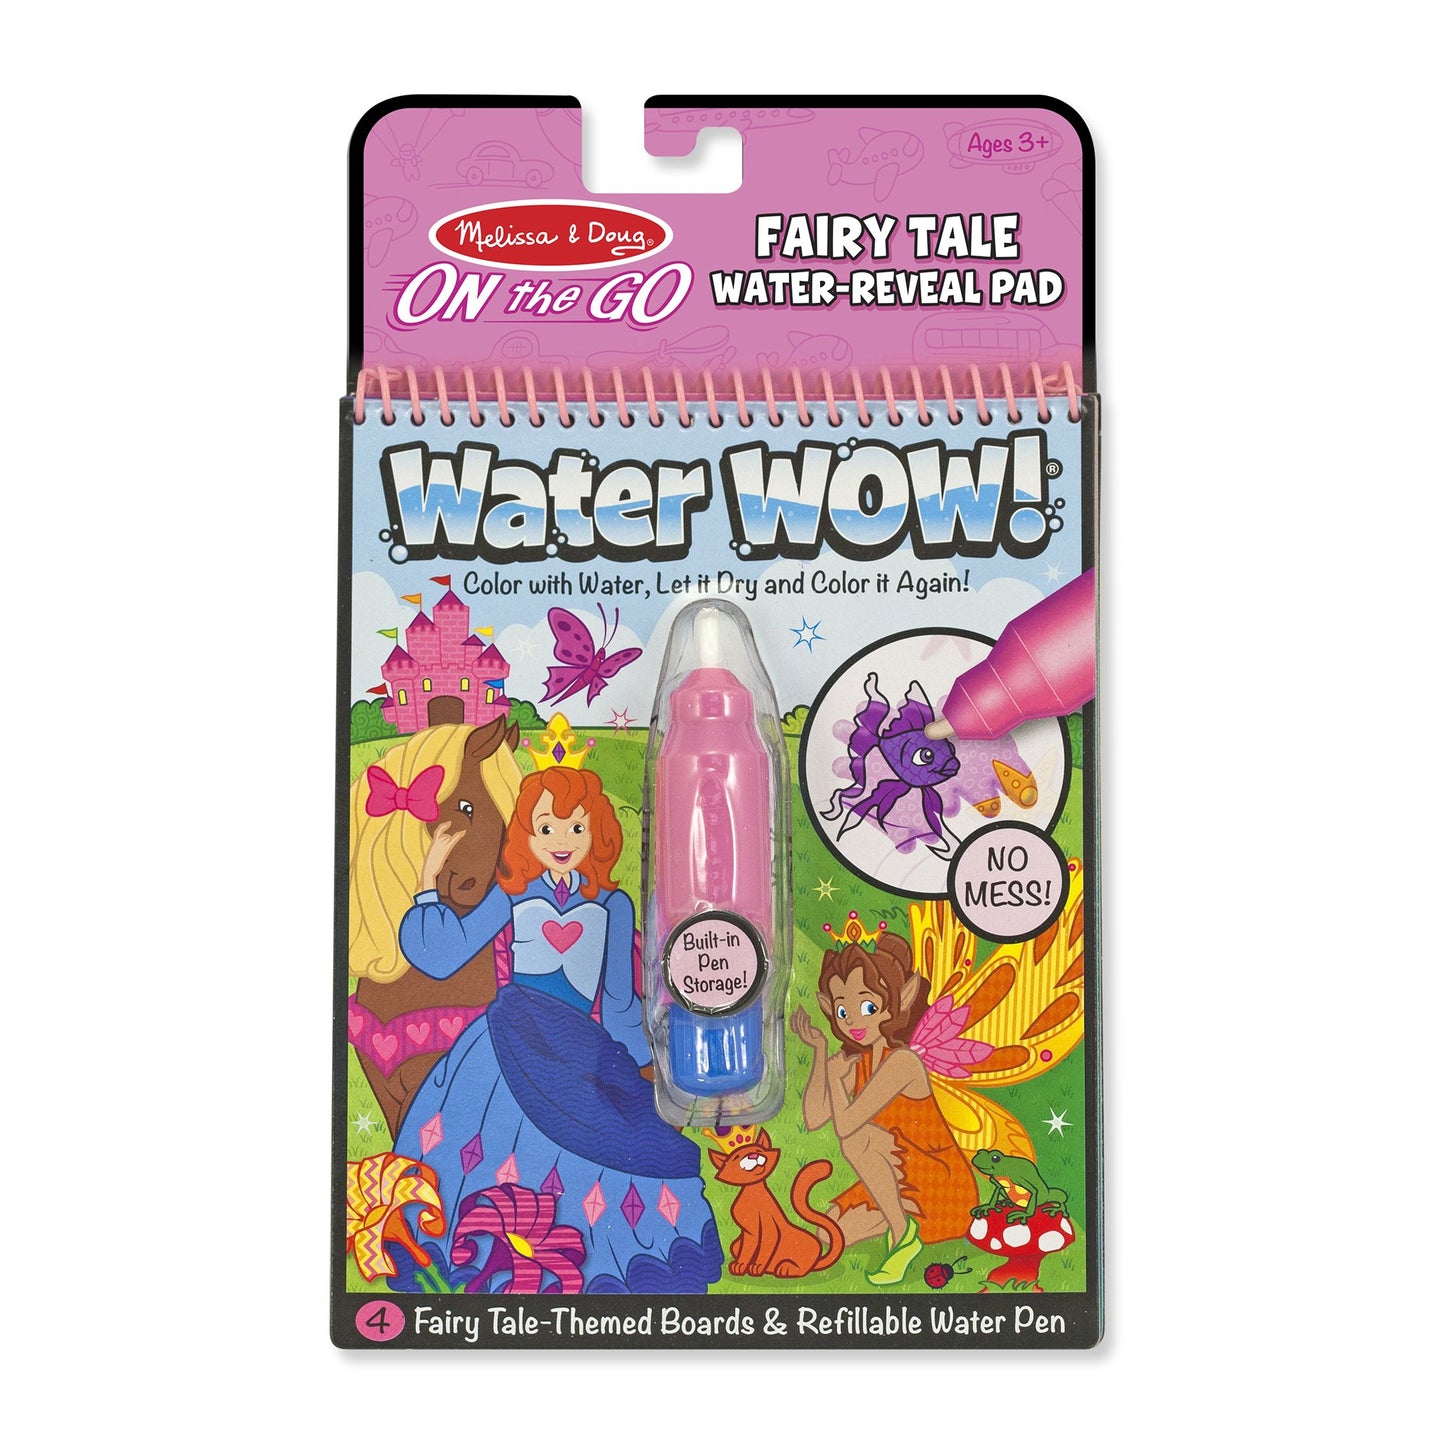 Melissa & Doug water wow Fairy tale - All About Kids Odense